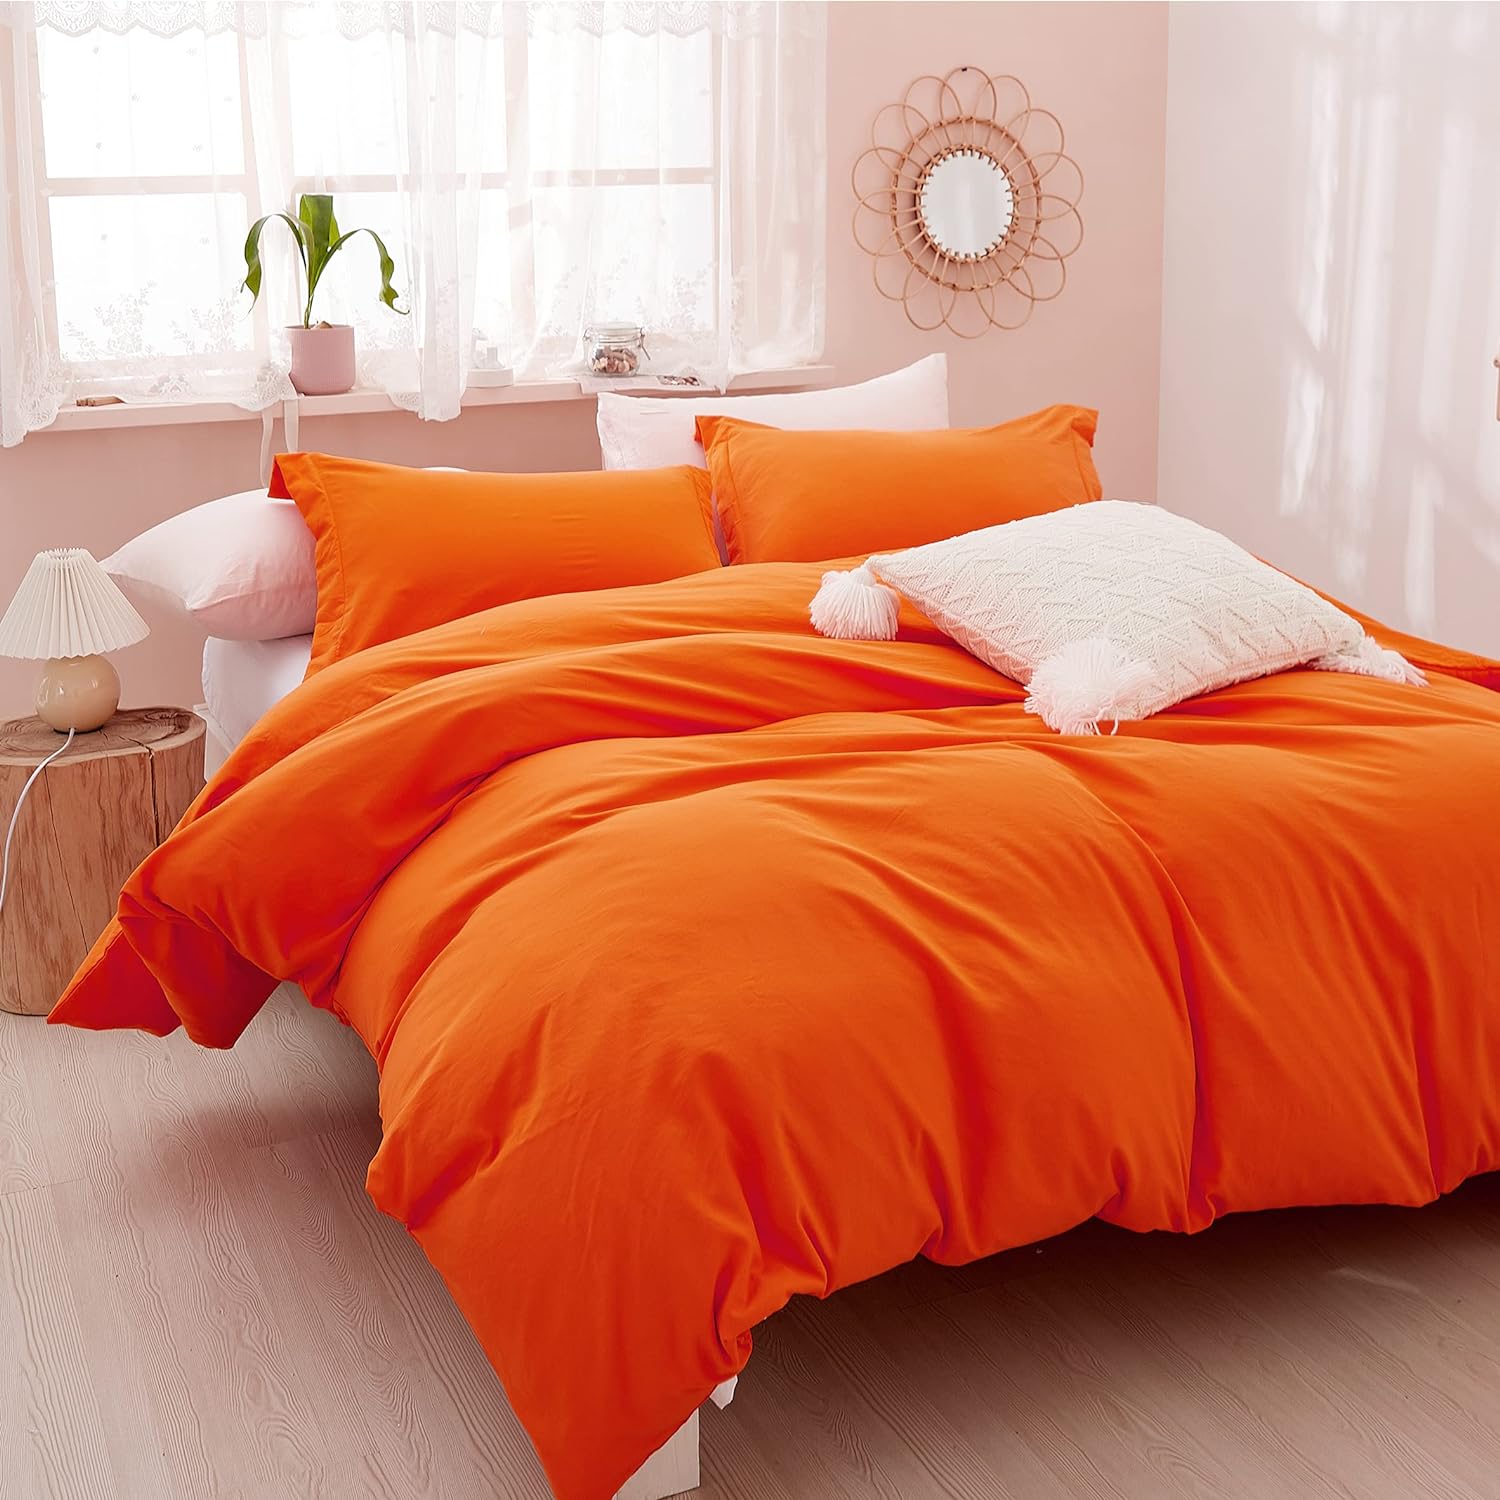 Bright Orange Duvet Cover Queen Size, 3 Pieces Ultra Soft Comfortable Microfiber Bedding Duvet Cover Set, 100% Washed Breathable for a Better Sleep with Hidden Zipper Closure, Corner Ties